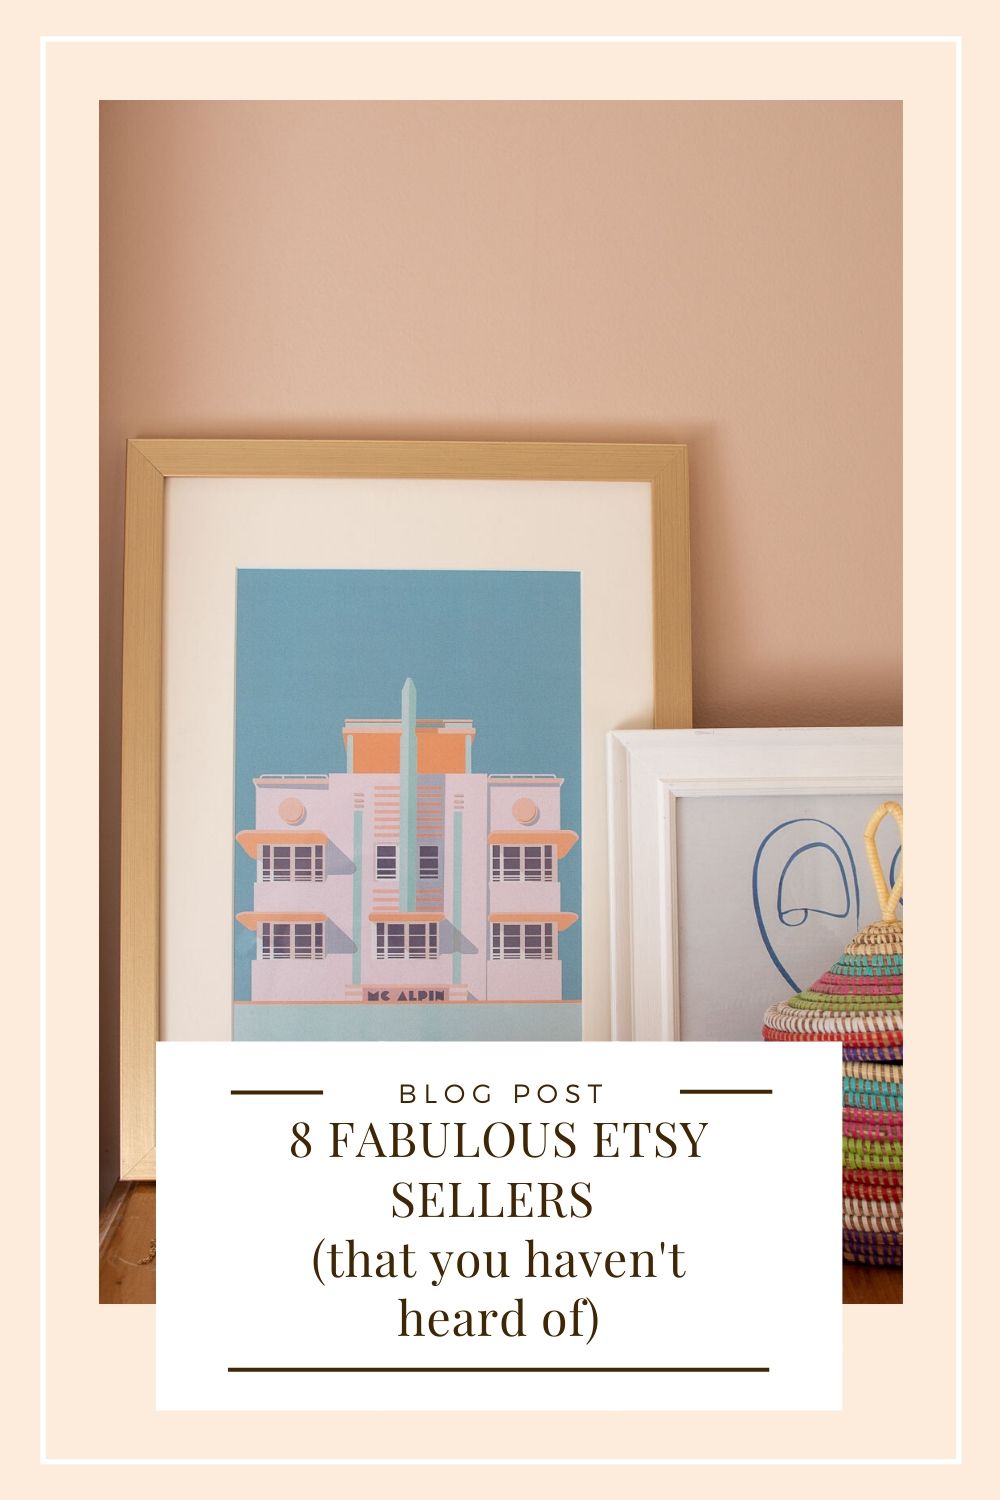 Pintrest poster for blog post, 8 Fabulous Etsy Sellers that you haven't heard of.